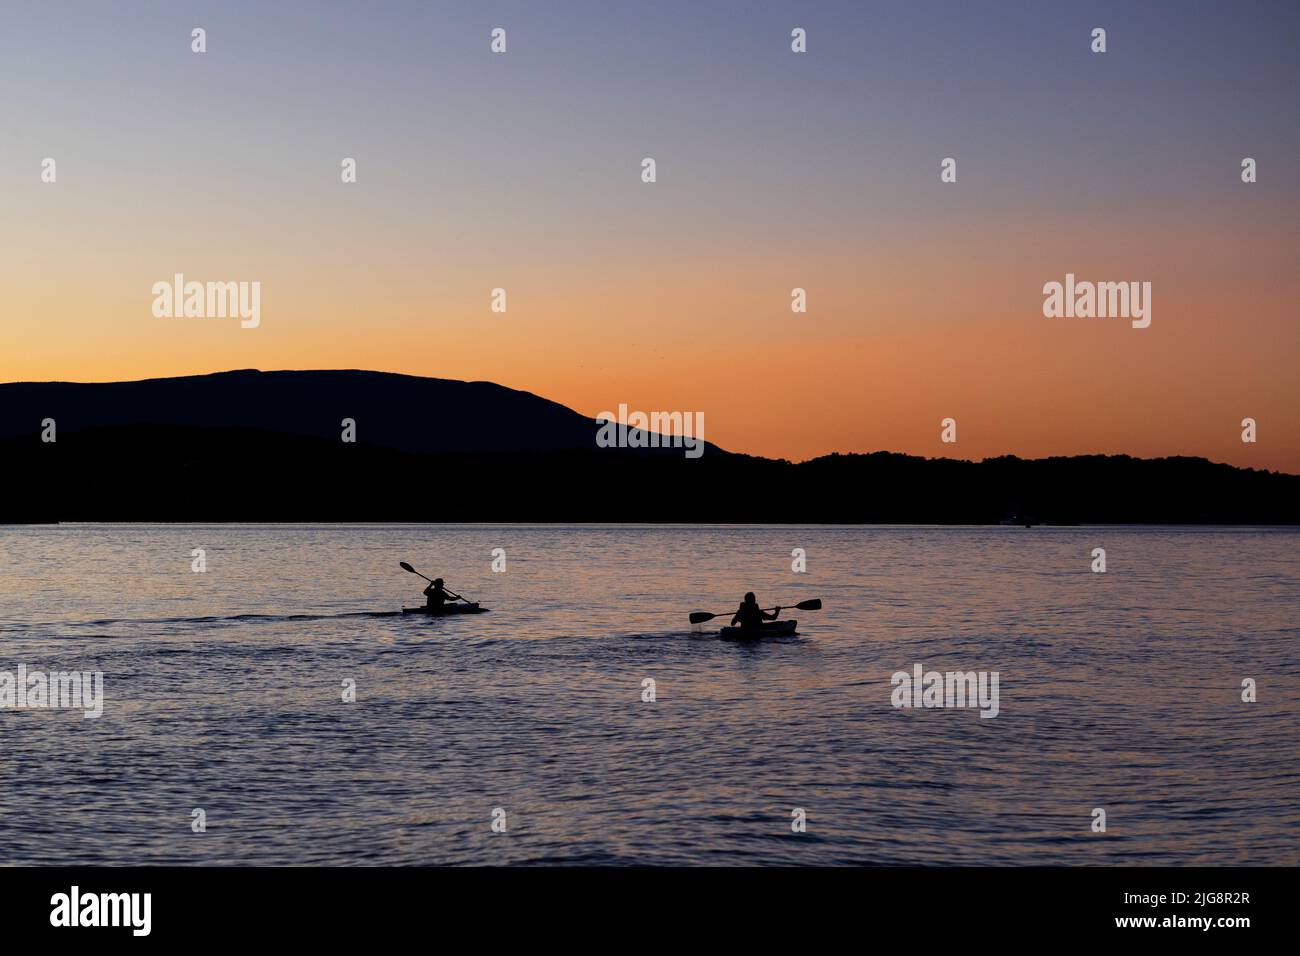 Two kayakers on the Hudson River at sunset in Tivoli, New York, USA. Stock Photo